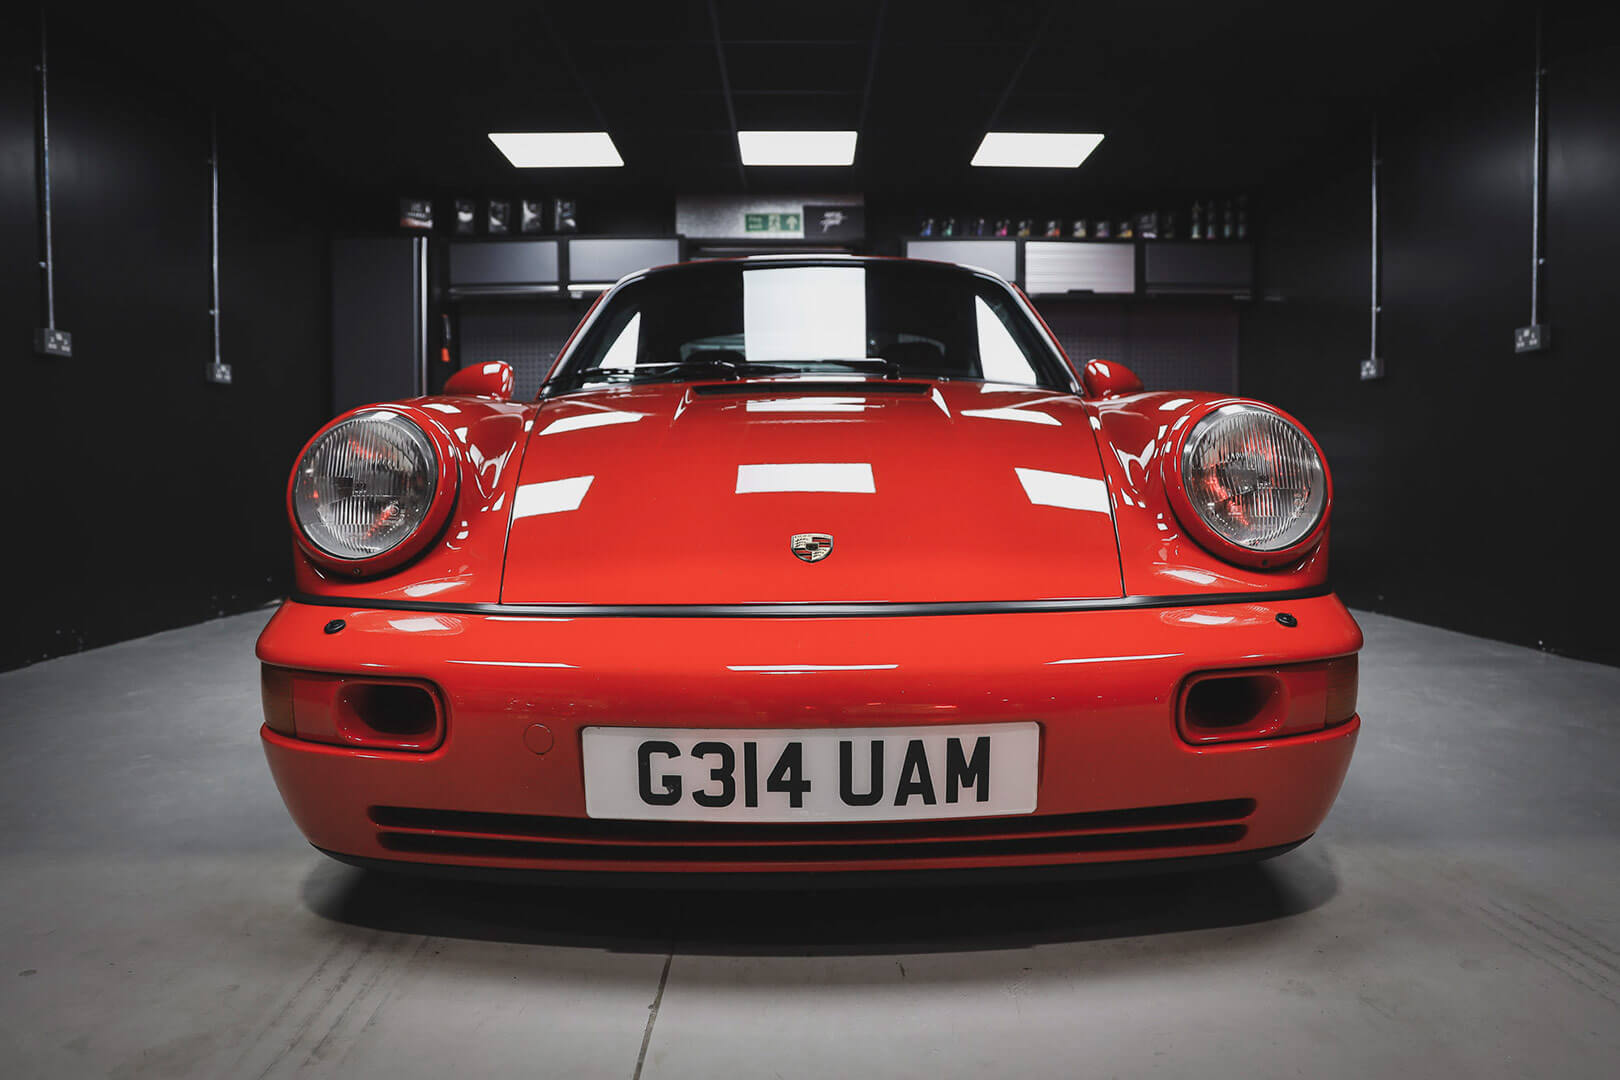 Porsche 964 - Detailing An ‘80s Air-Cooled Icon image